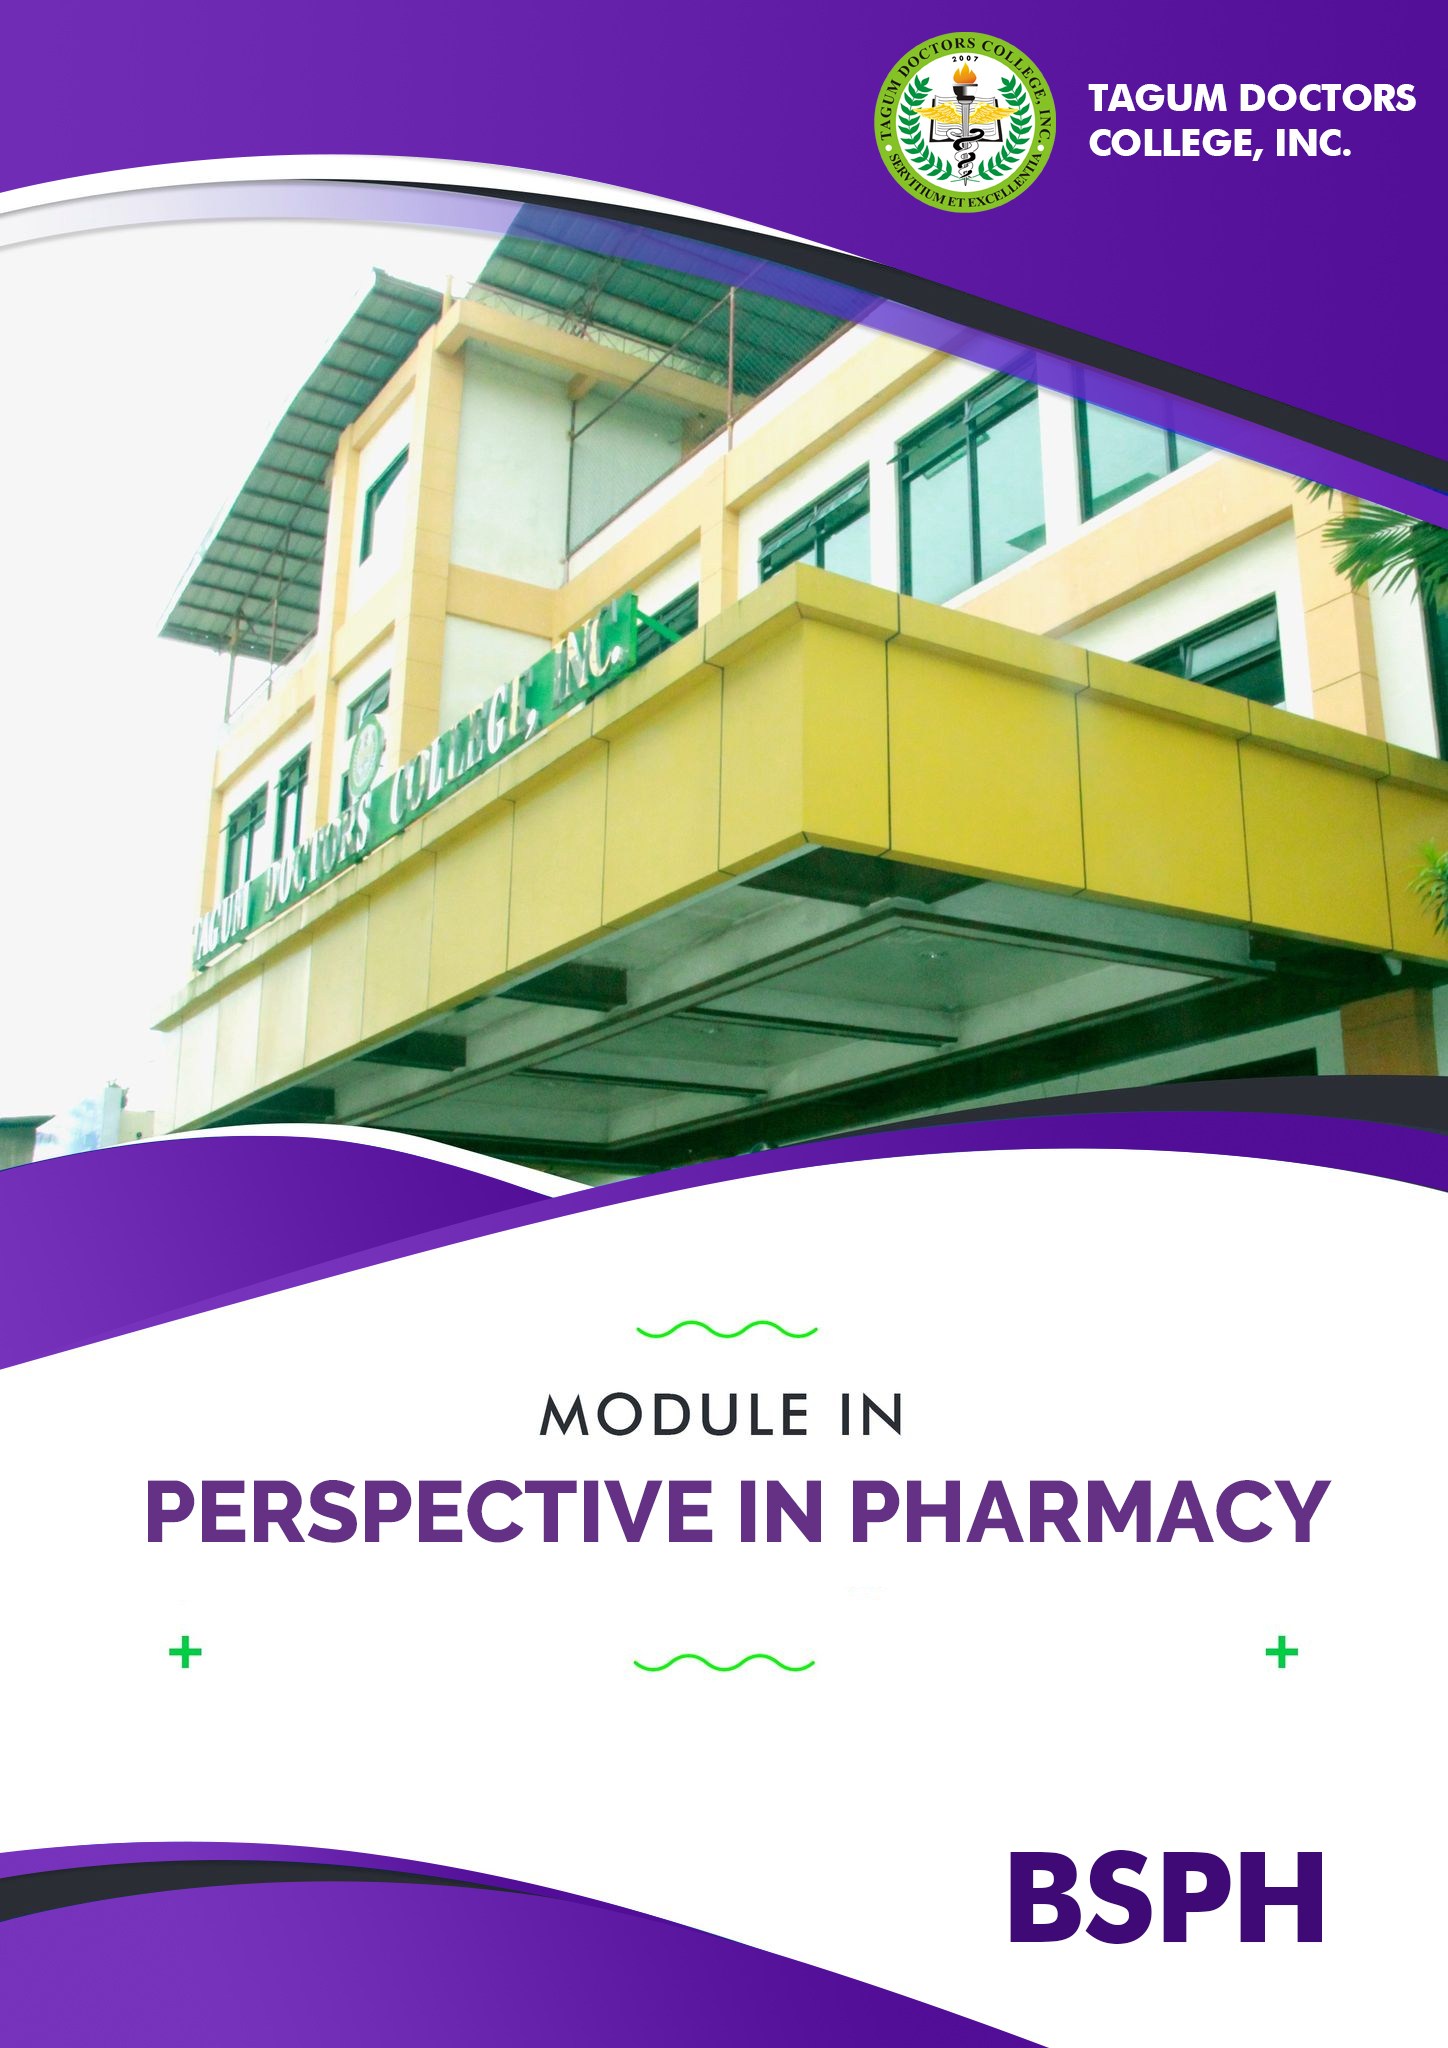 Perspectives in Pharmacy - BSPh 1D